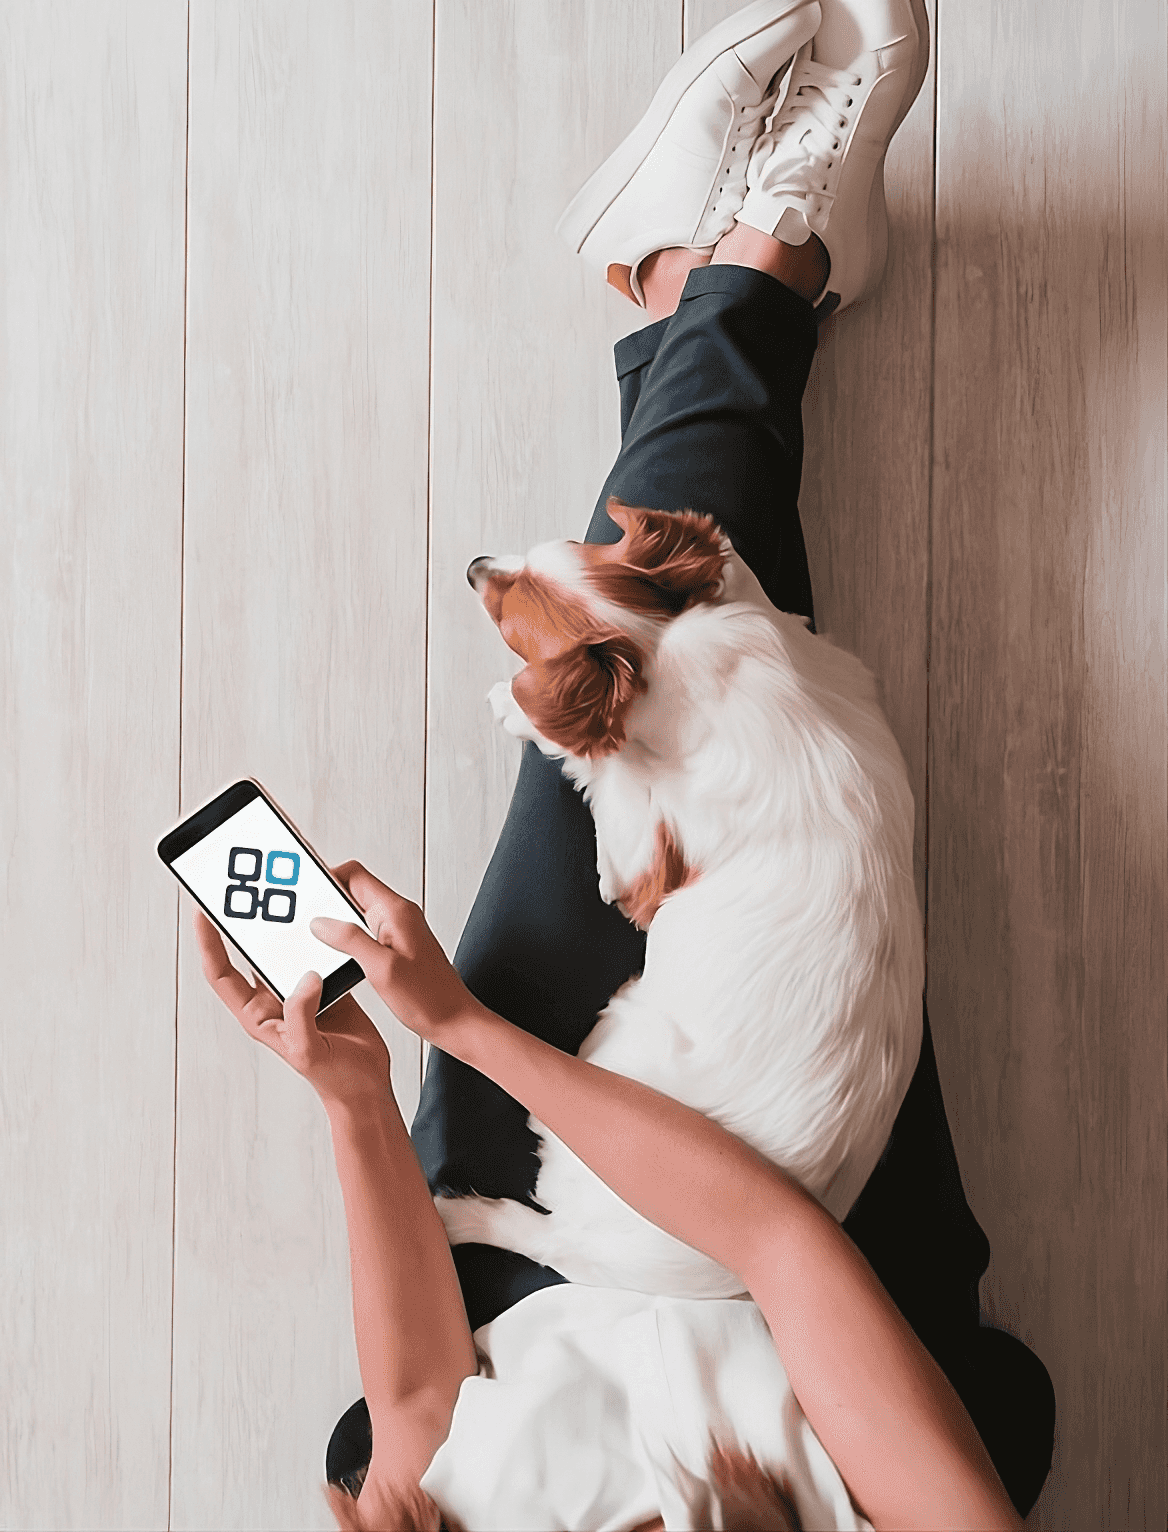 Photo of a person with a dog on their lap while on their mobile phone.